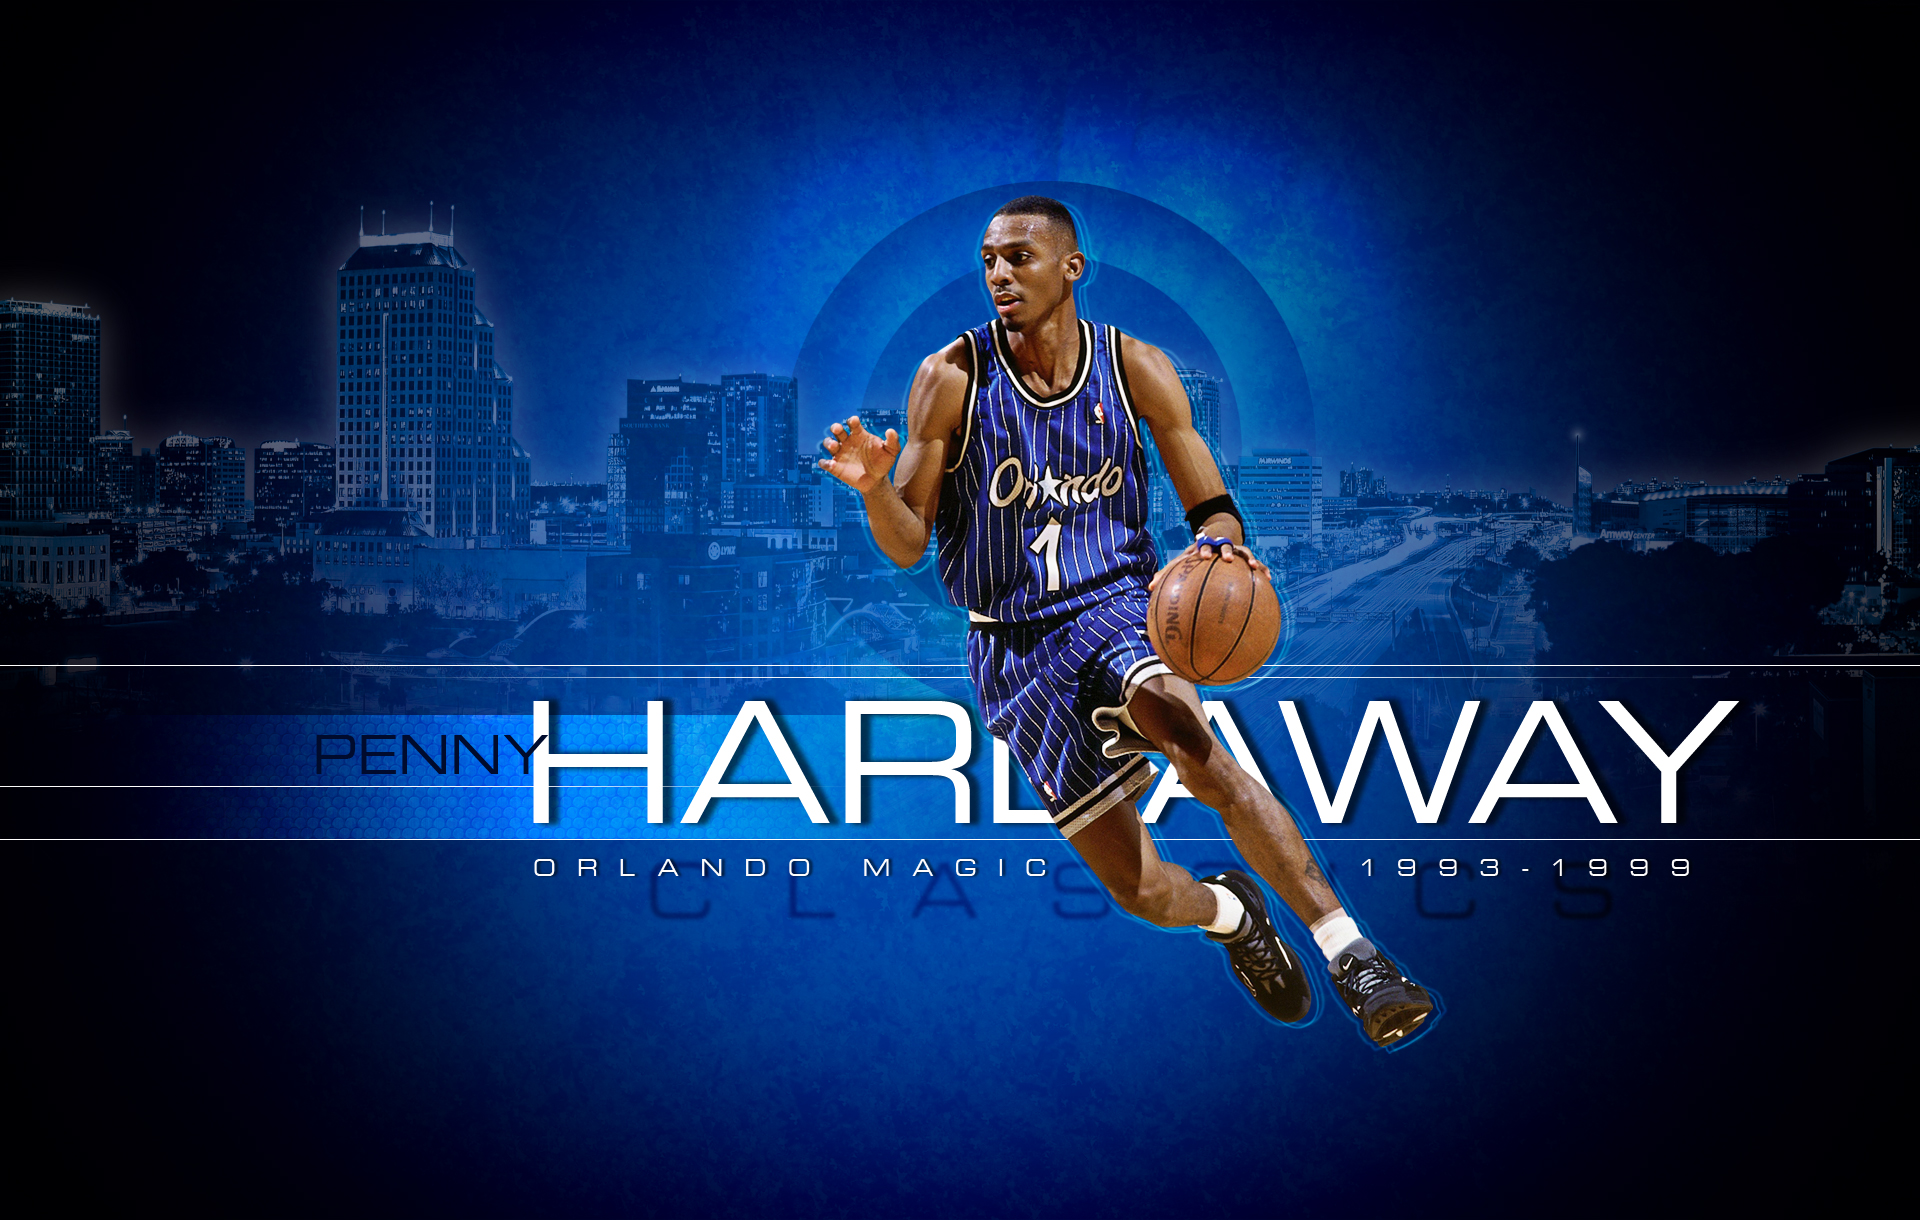 Magic Throwback Wallpaper The Official Site Of